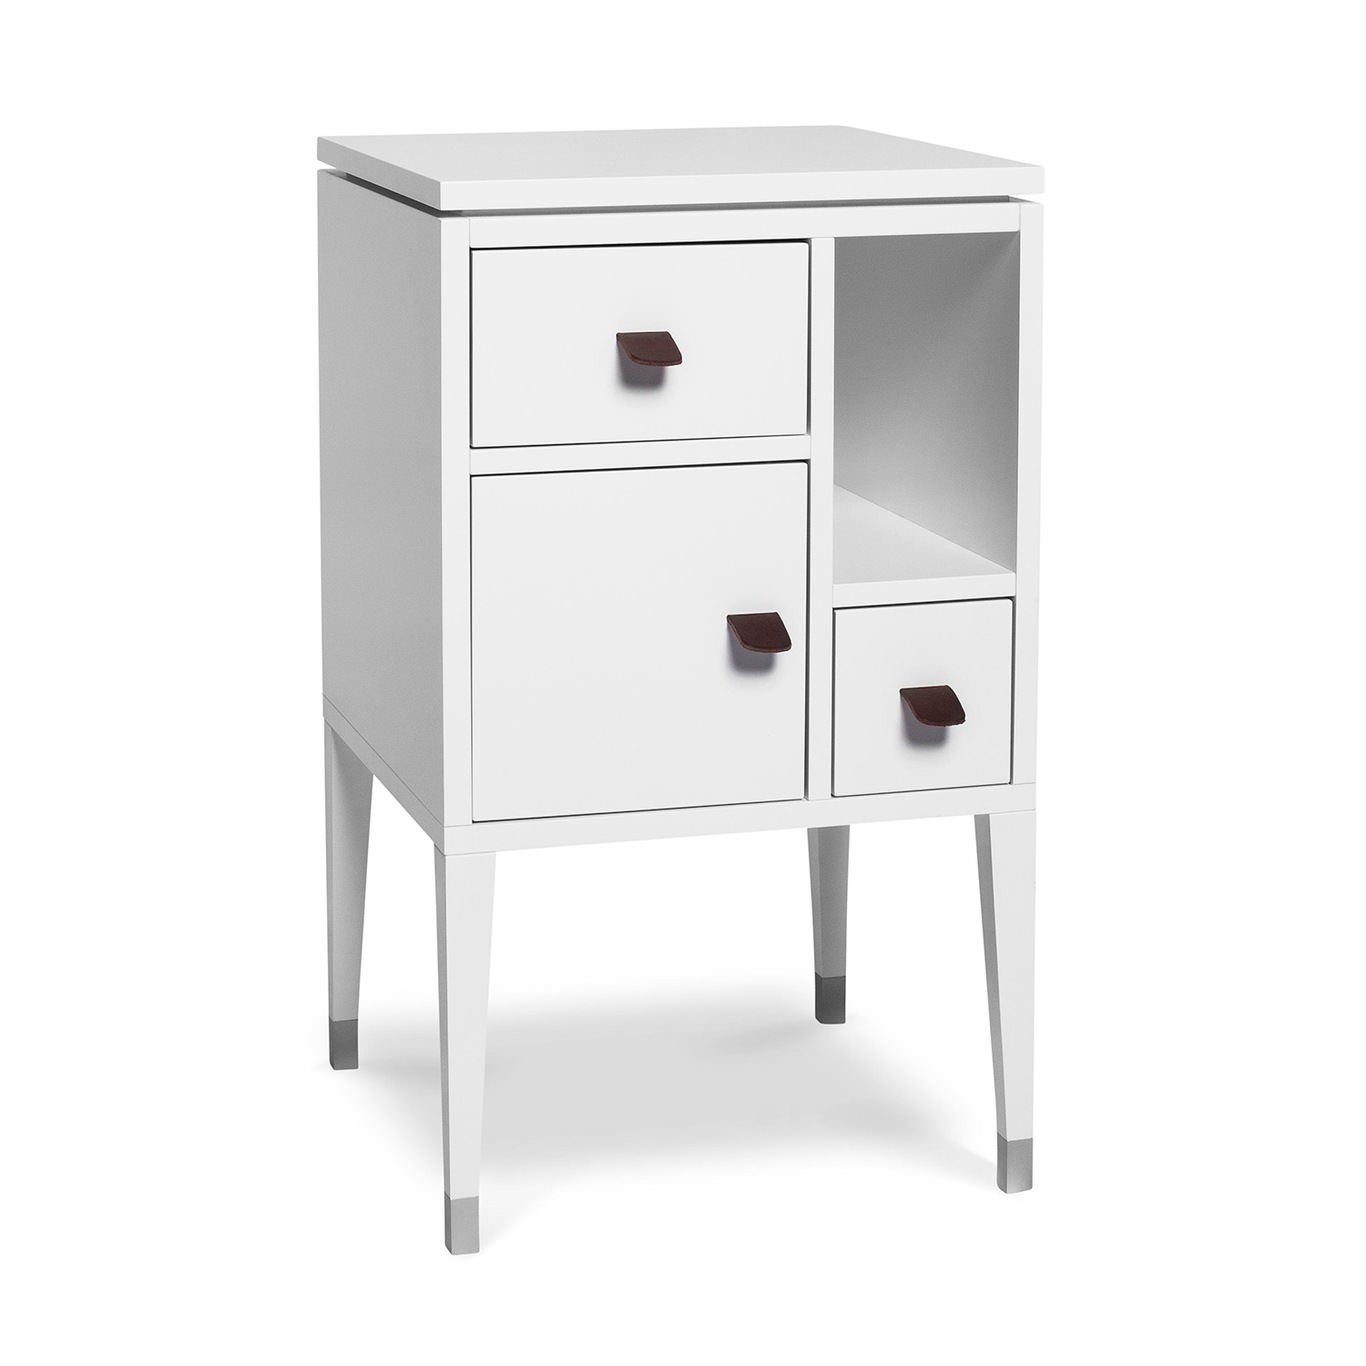 Abisko Bedside Table Tall Legs, White Lacquer